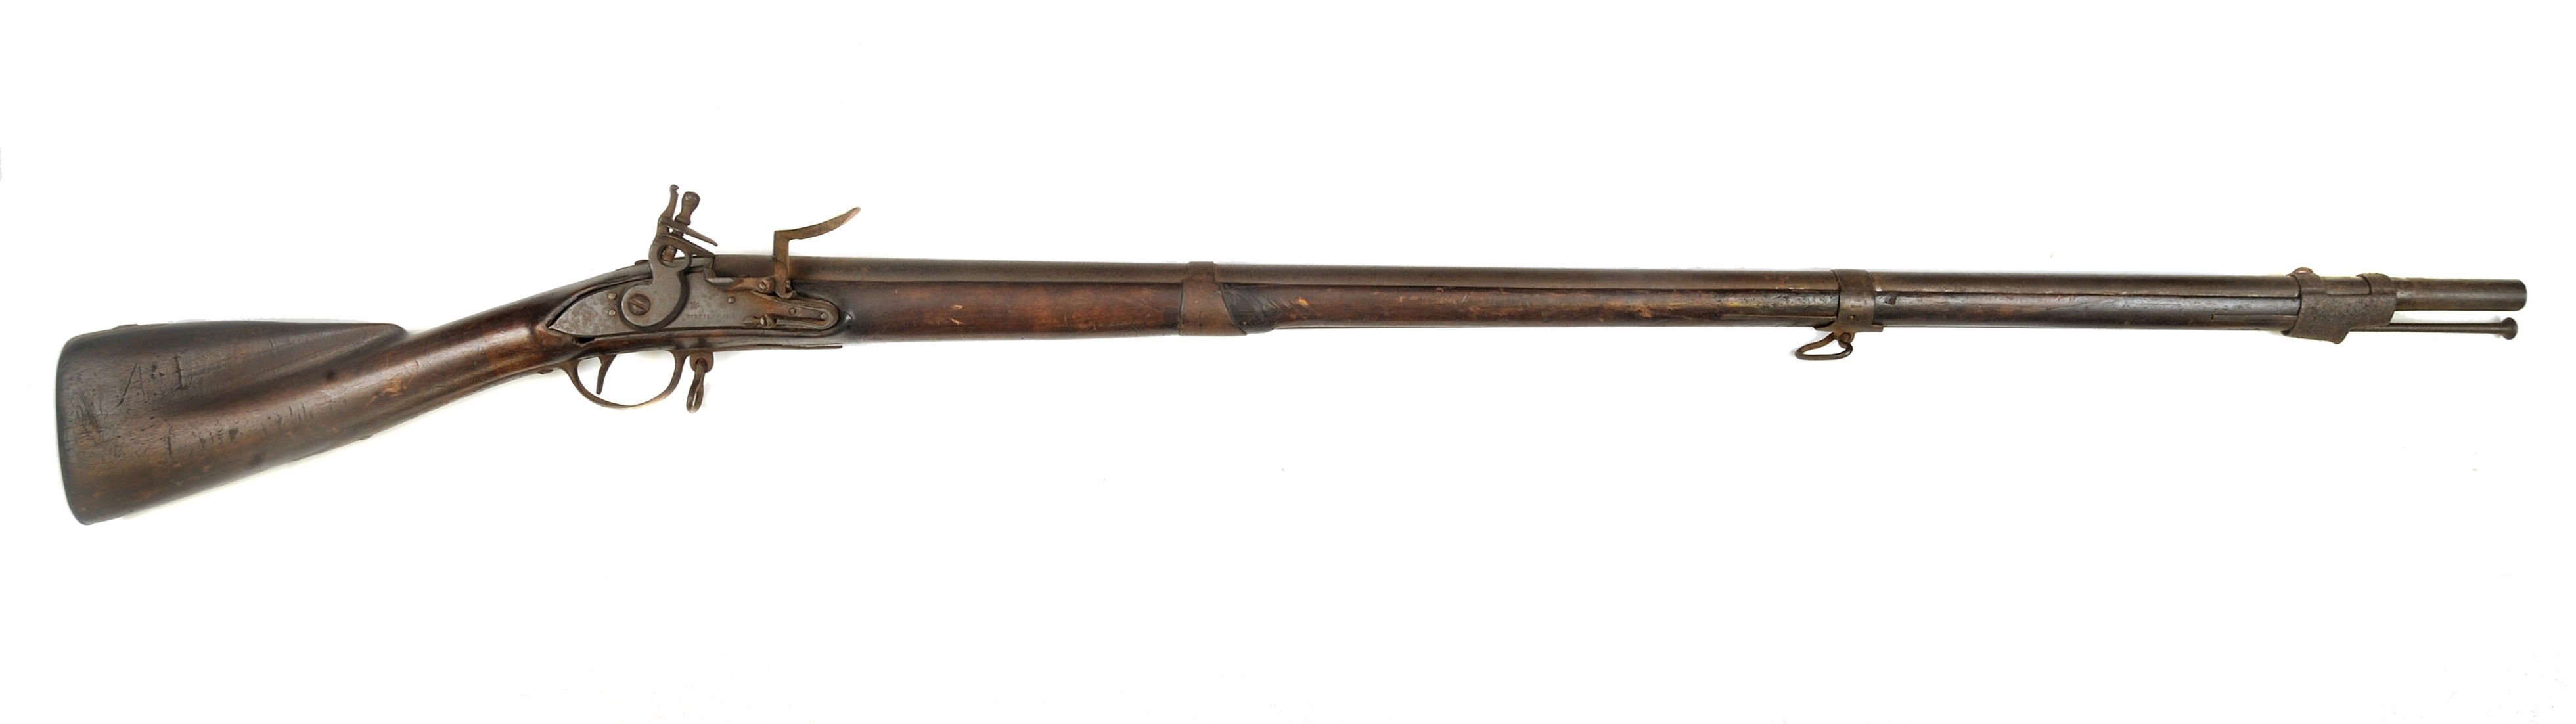 Lunch Bite - French Model 1763 infantry musket - The American ...